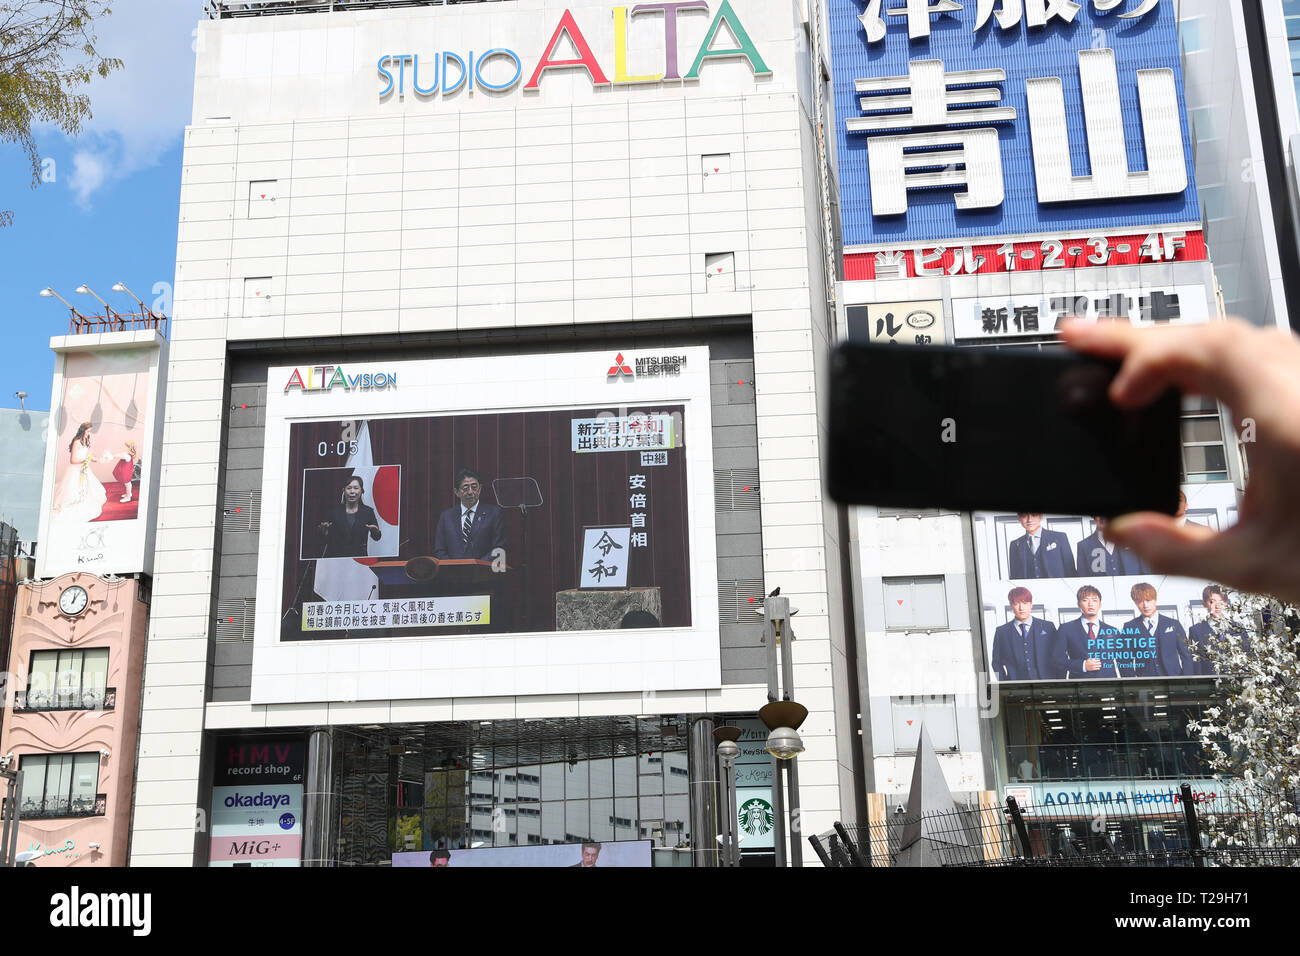 Tokyo, Japan. 1st Apr, 2019. People watch a large screen showing Japanese Prime Minister Shinzo Abe's announcement about the name of the new Imperial era, 'Reiwa,' in Tokyo, Japan on April 1, 2019. The Japanese government officially announced the country's next era will be known as the 'Reiwa' era on Monday, a month before Crown Prince Naruhito ascends the throne following Emperor Akihito's abdication. Credit: Yohei Osada/AFLO/Alamy Live News Stock Photo